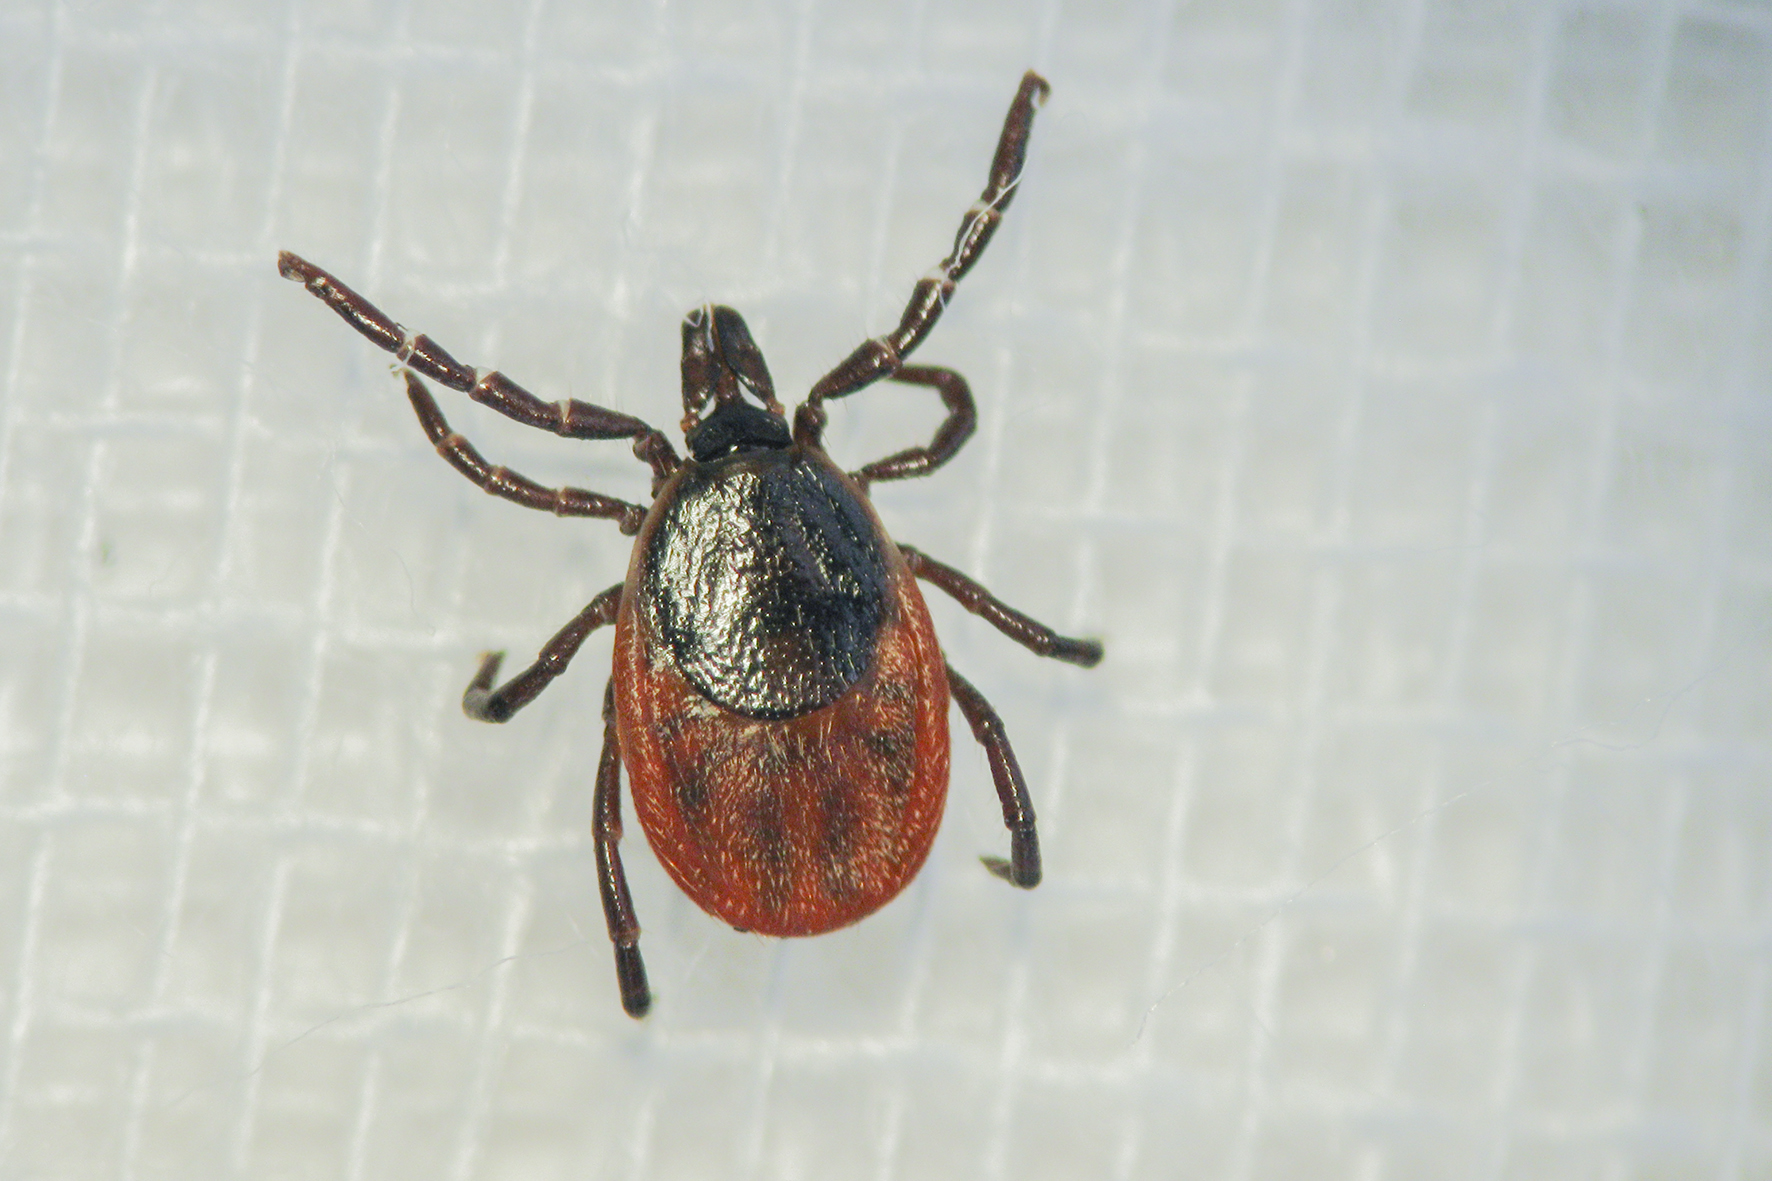 Ticks transmit the bacterium Coxiella burnetii. The pathogen could be detected in the faeces of the tick.